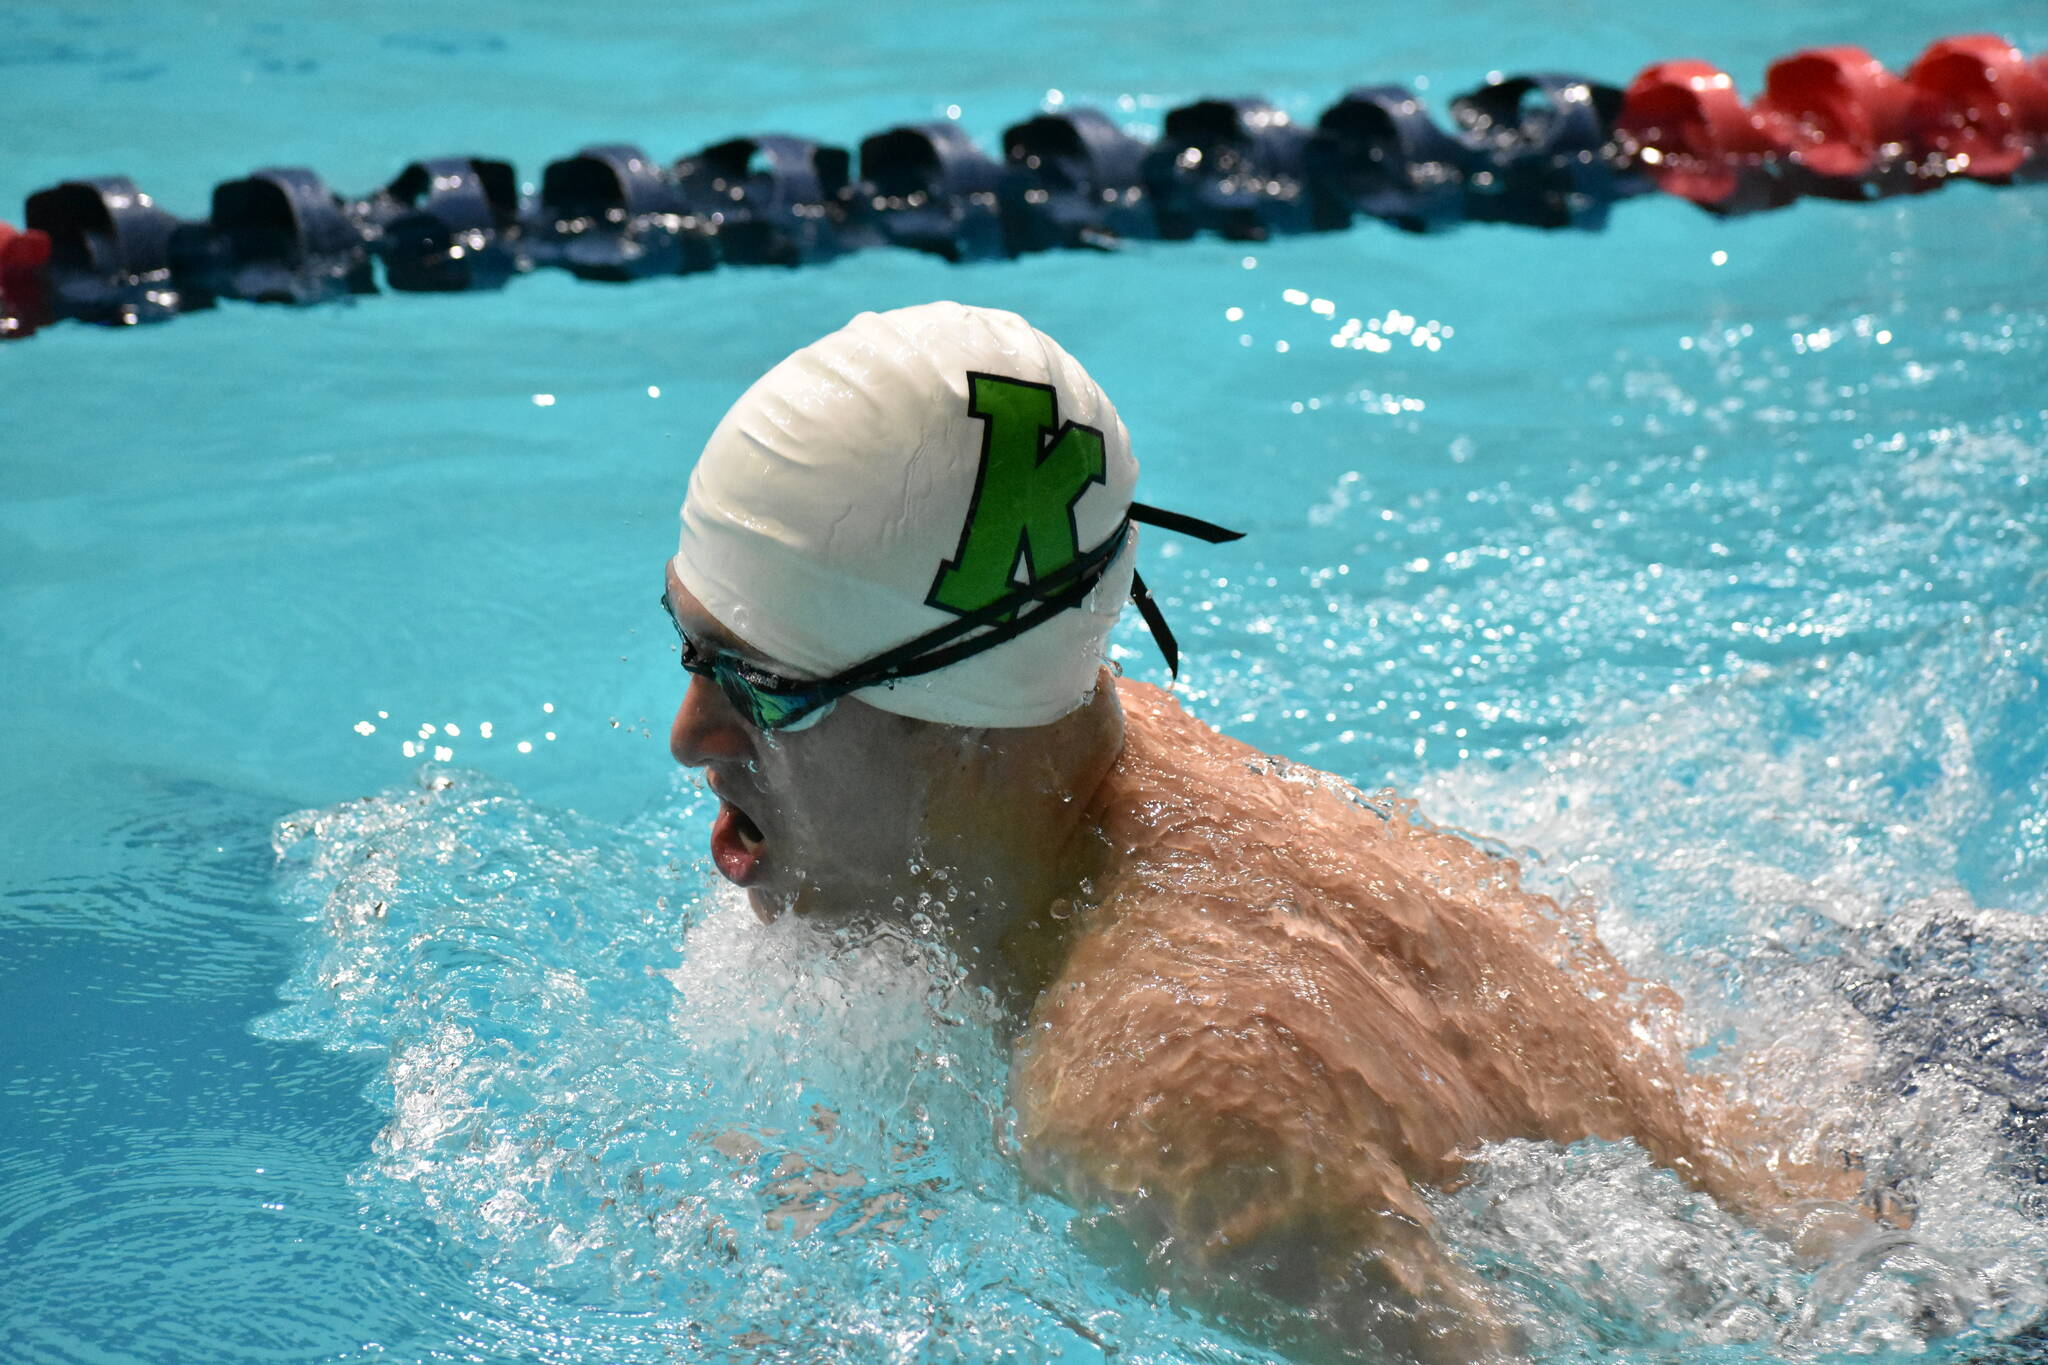 Ben Ray / The Reporter
Conk swimmer competes in the breaststroke at the King County Aquatic Center.